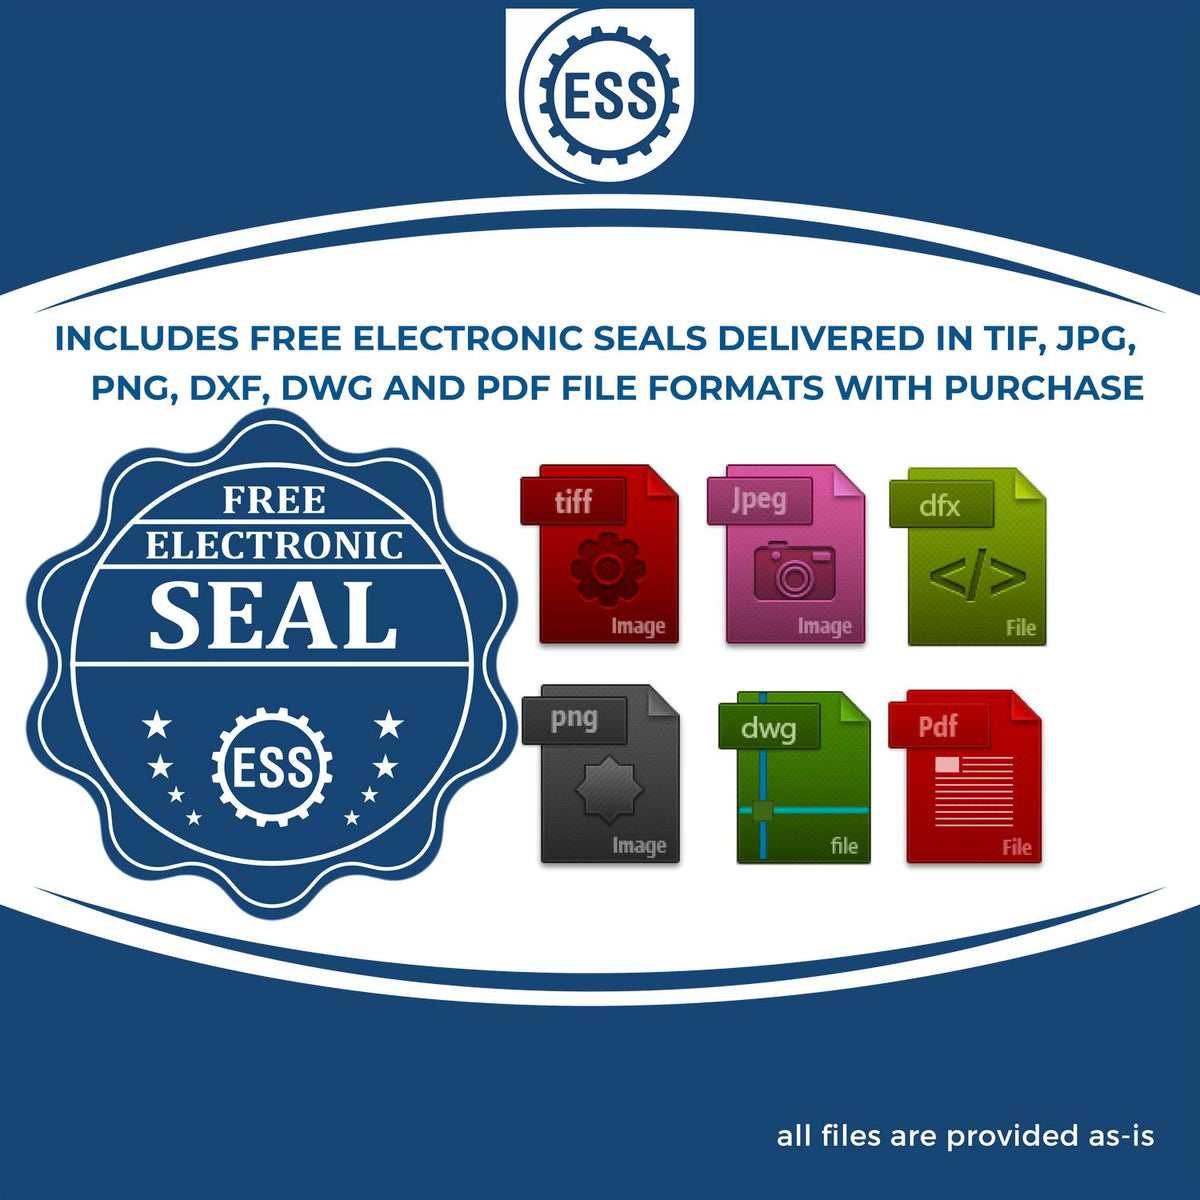 An infographic for the free electronic seal for the Slim Pre-Inked Rectangular Notary Stamp for Maryland illustrating the different file type icons such as DXF, DWG, TIF, JPG and PNG.